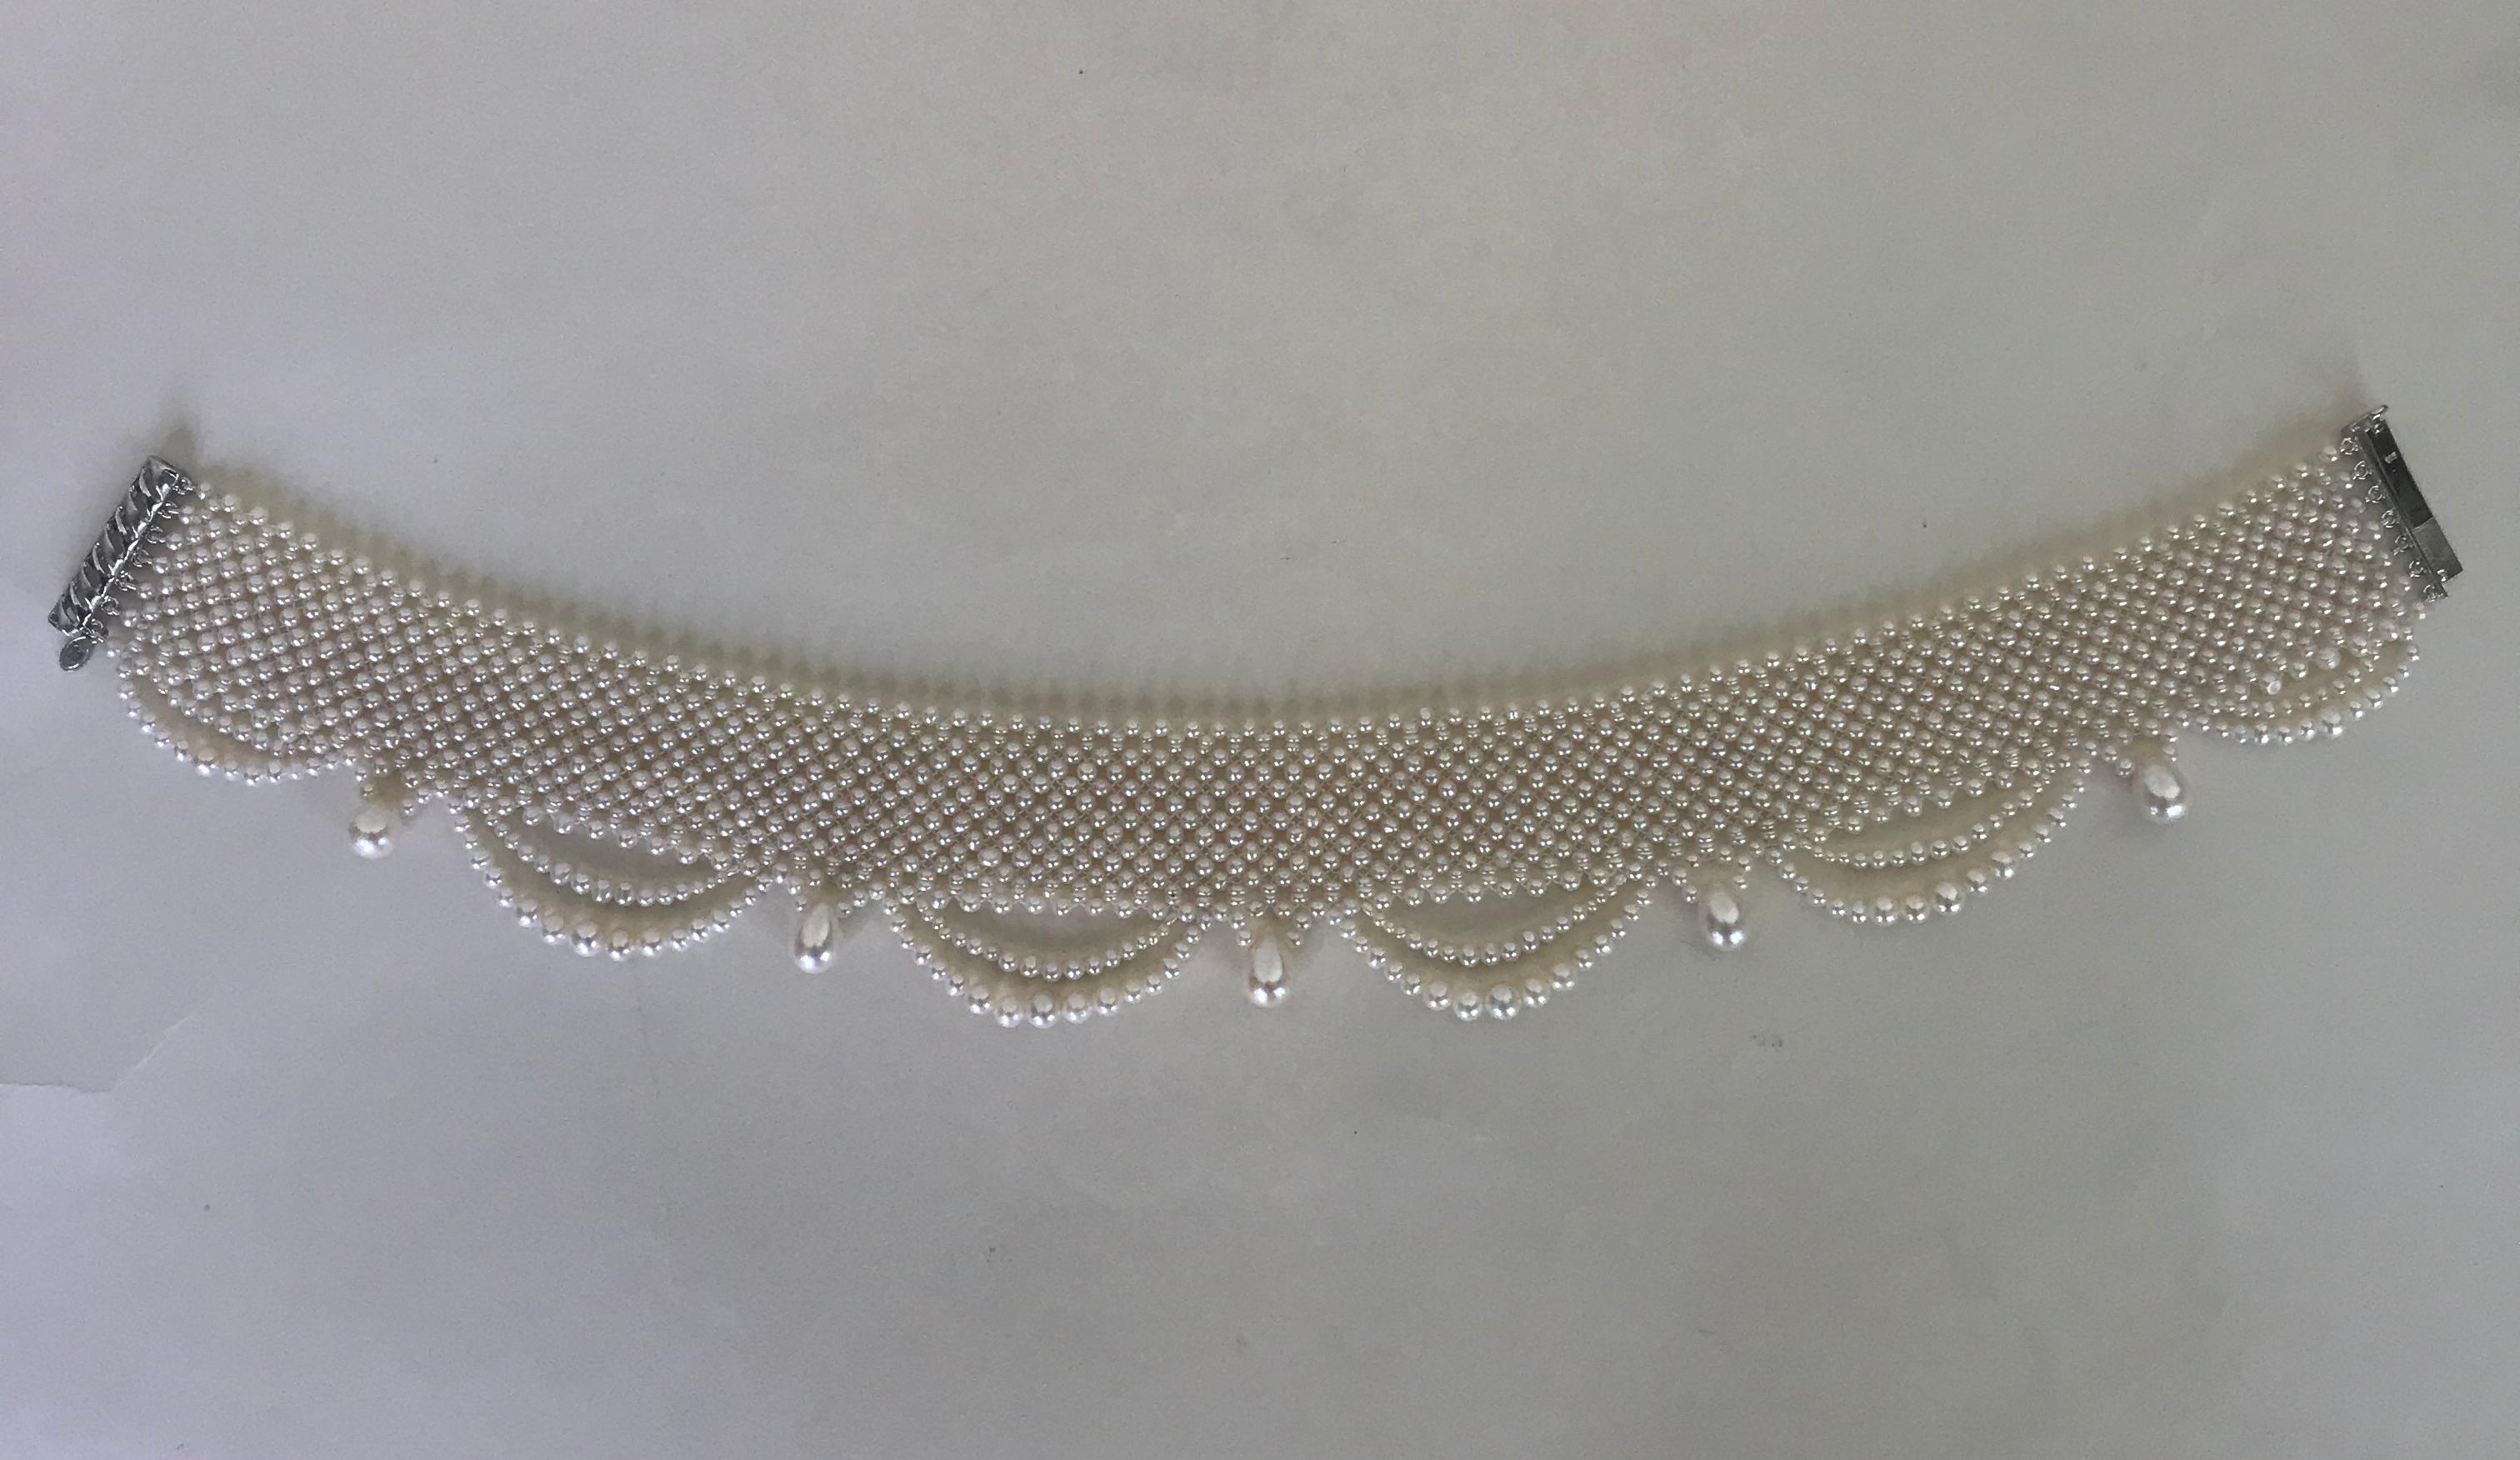 Marina J. Woven Pearl Draped Choker with Pearl drops and secure sliding clasp 3